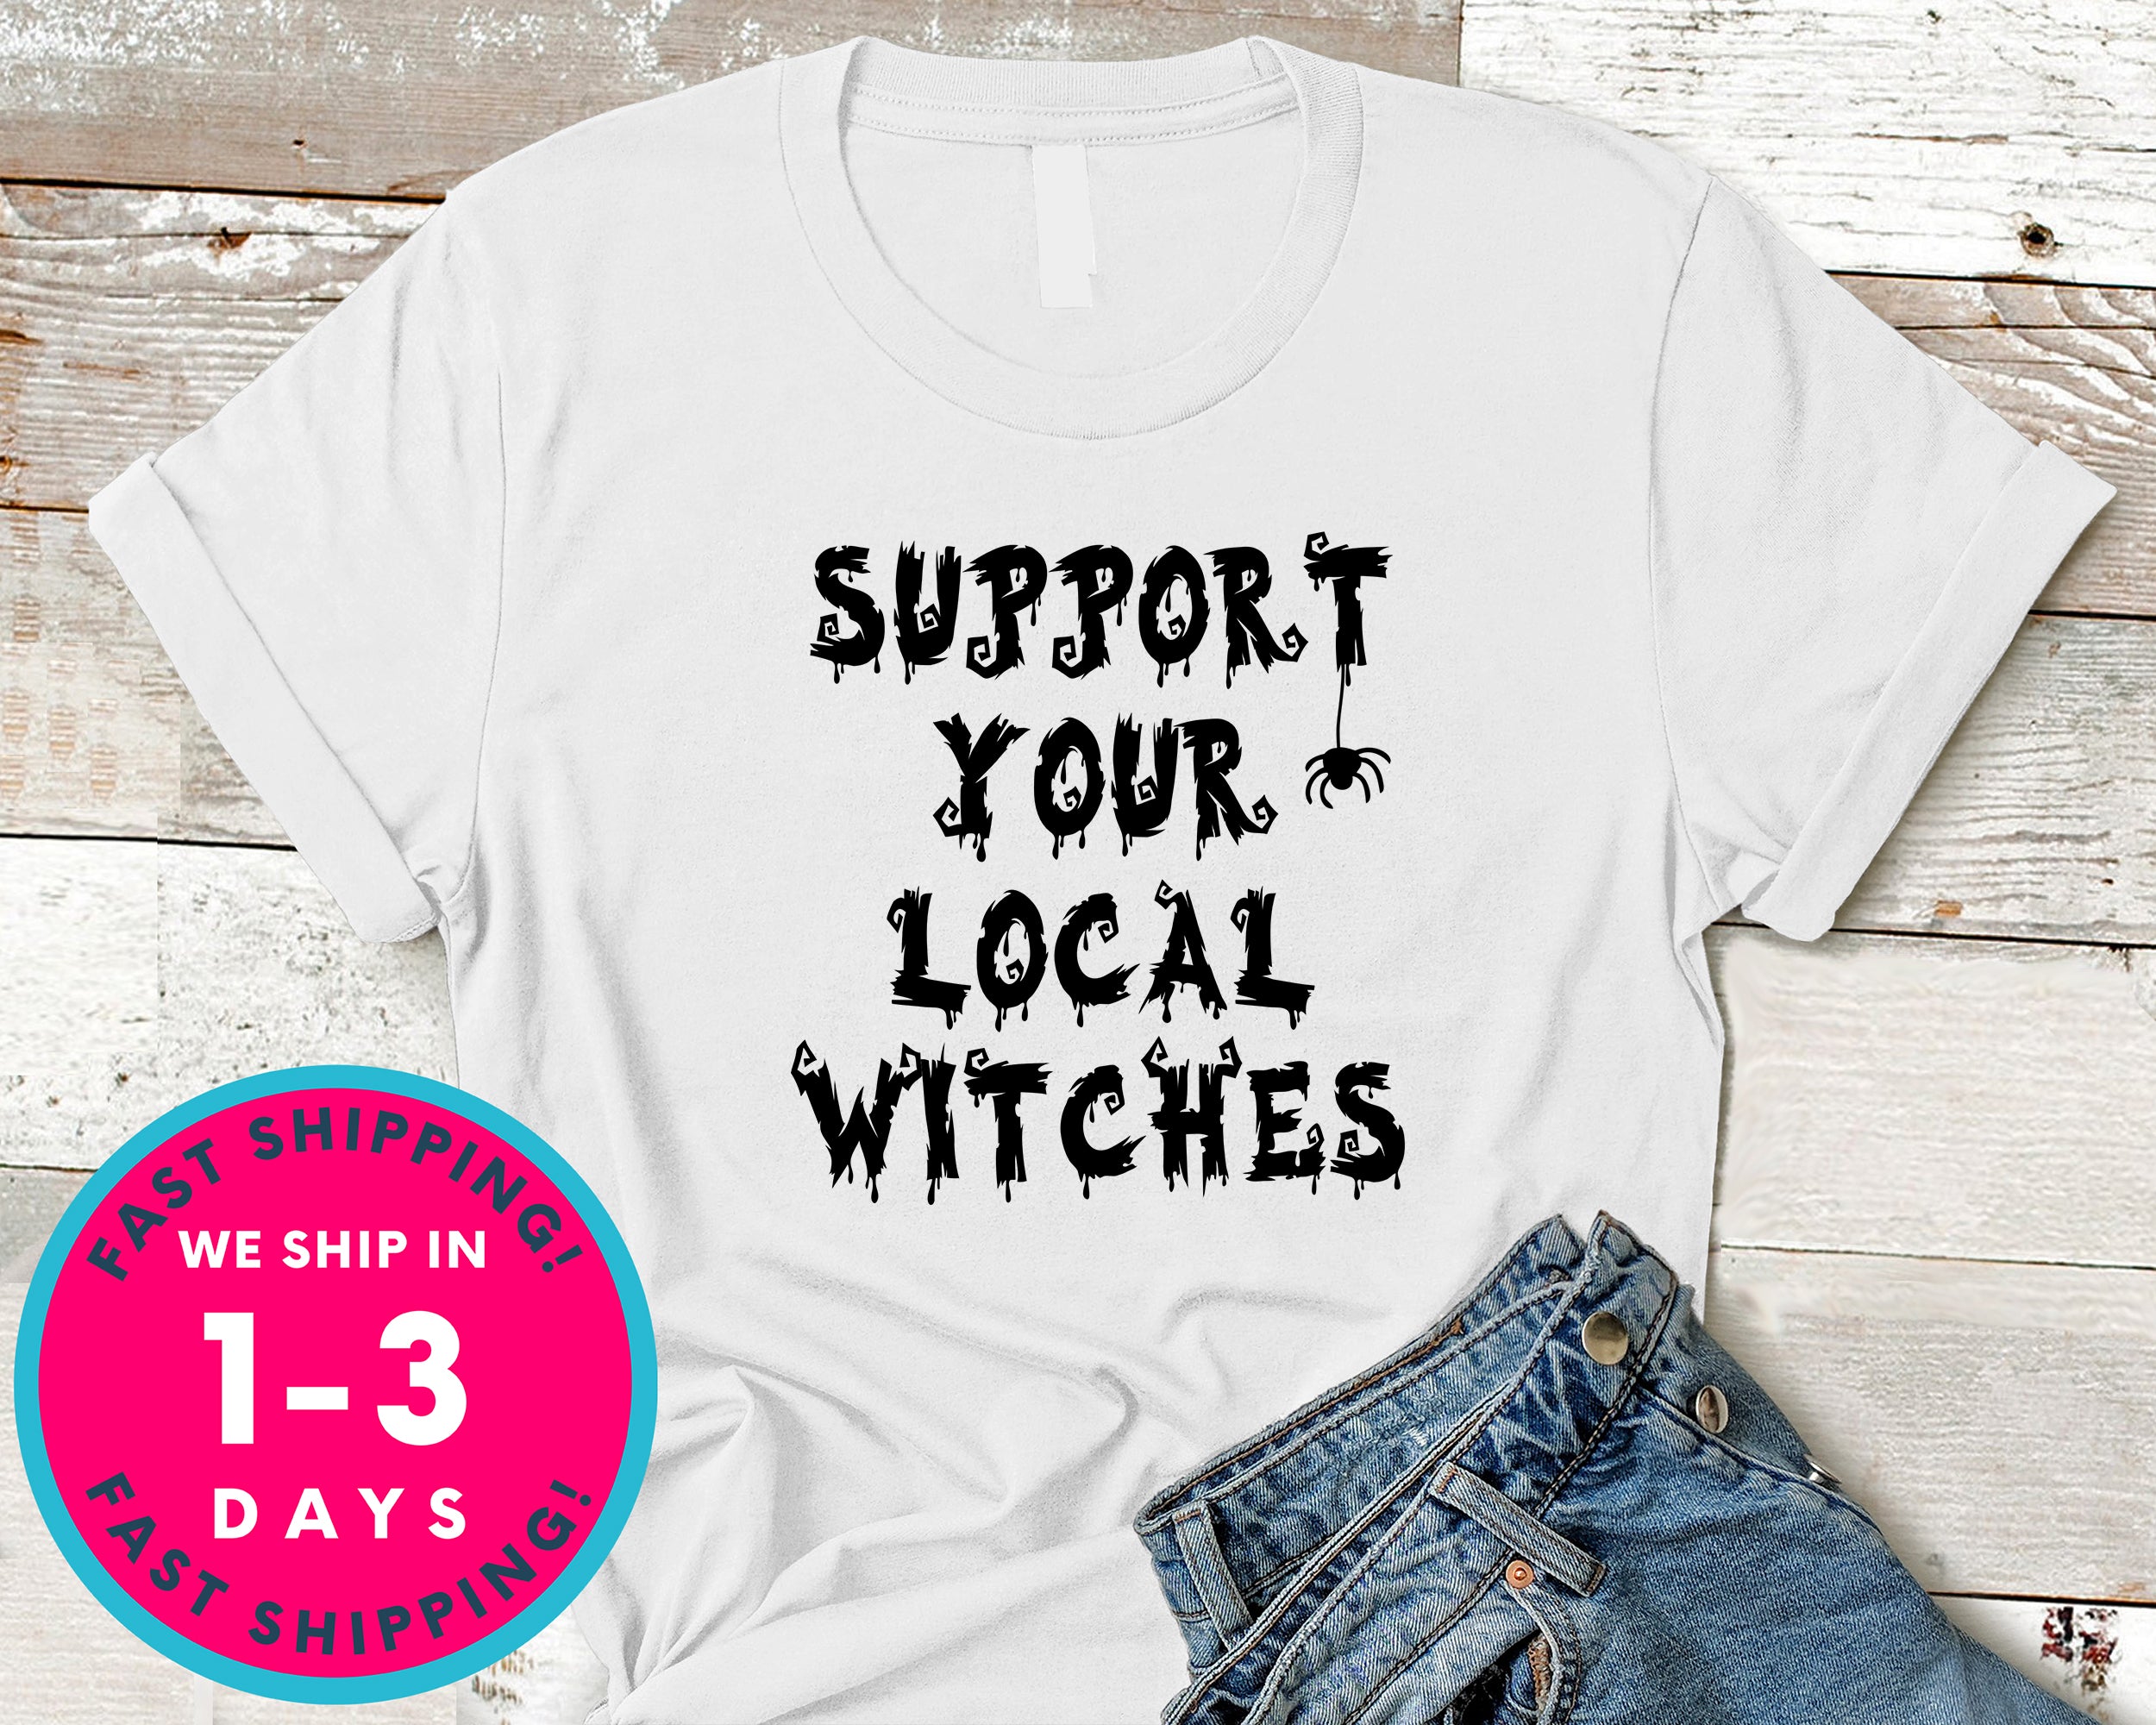 Witchcraft Pagan Support Your Local Witches T-Shirt - Halloween Horror Scary Shirt